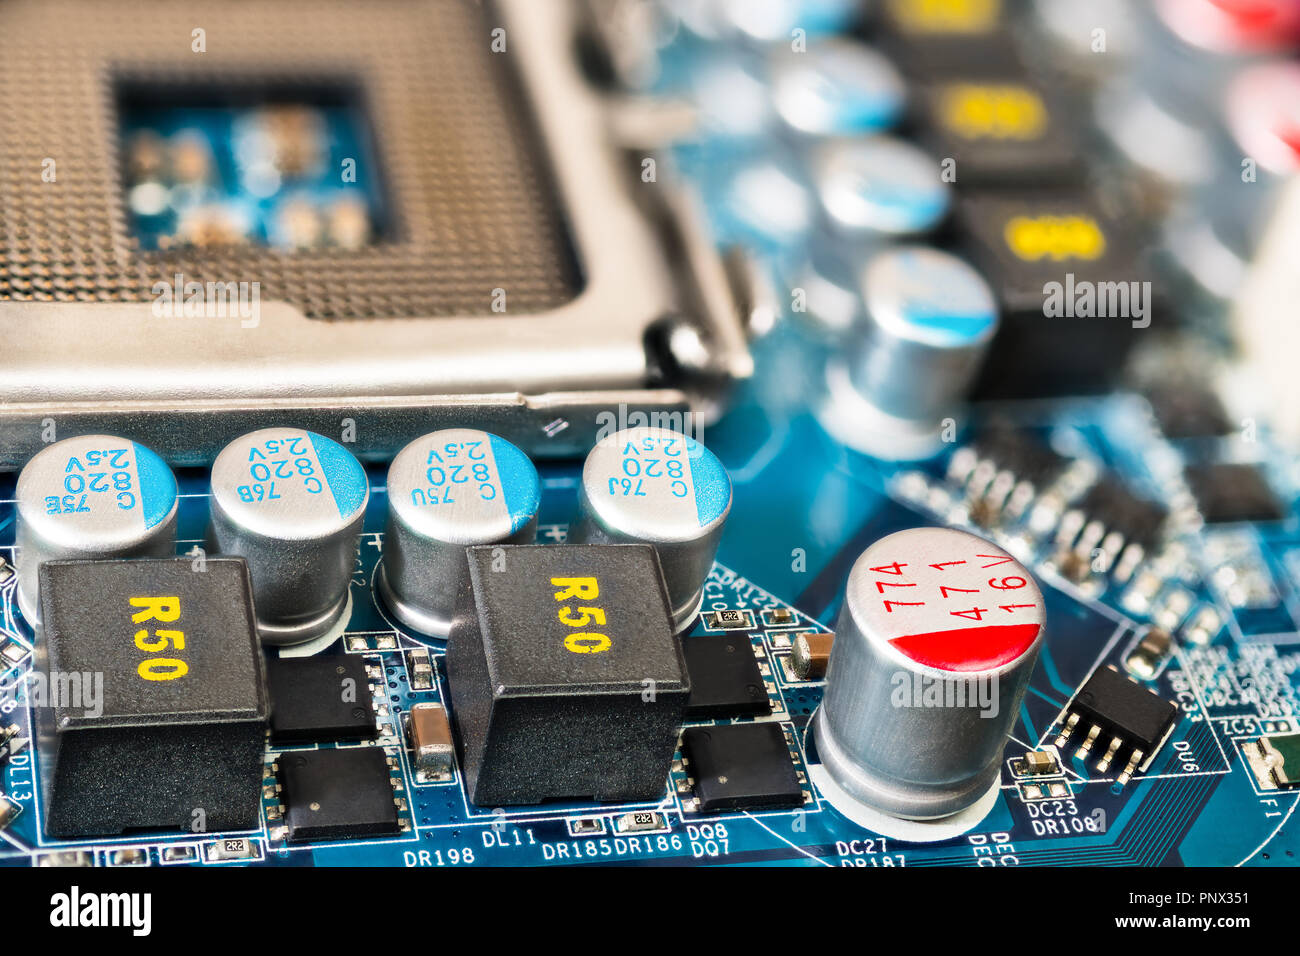 Computer mainboard detail. Pulse source circuits. Hardware electronic components close-up. CPU socket, inductors, capacitors. Surface mount technology. Stock Photo